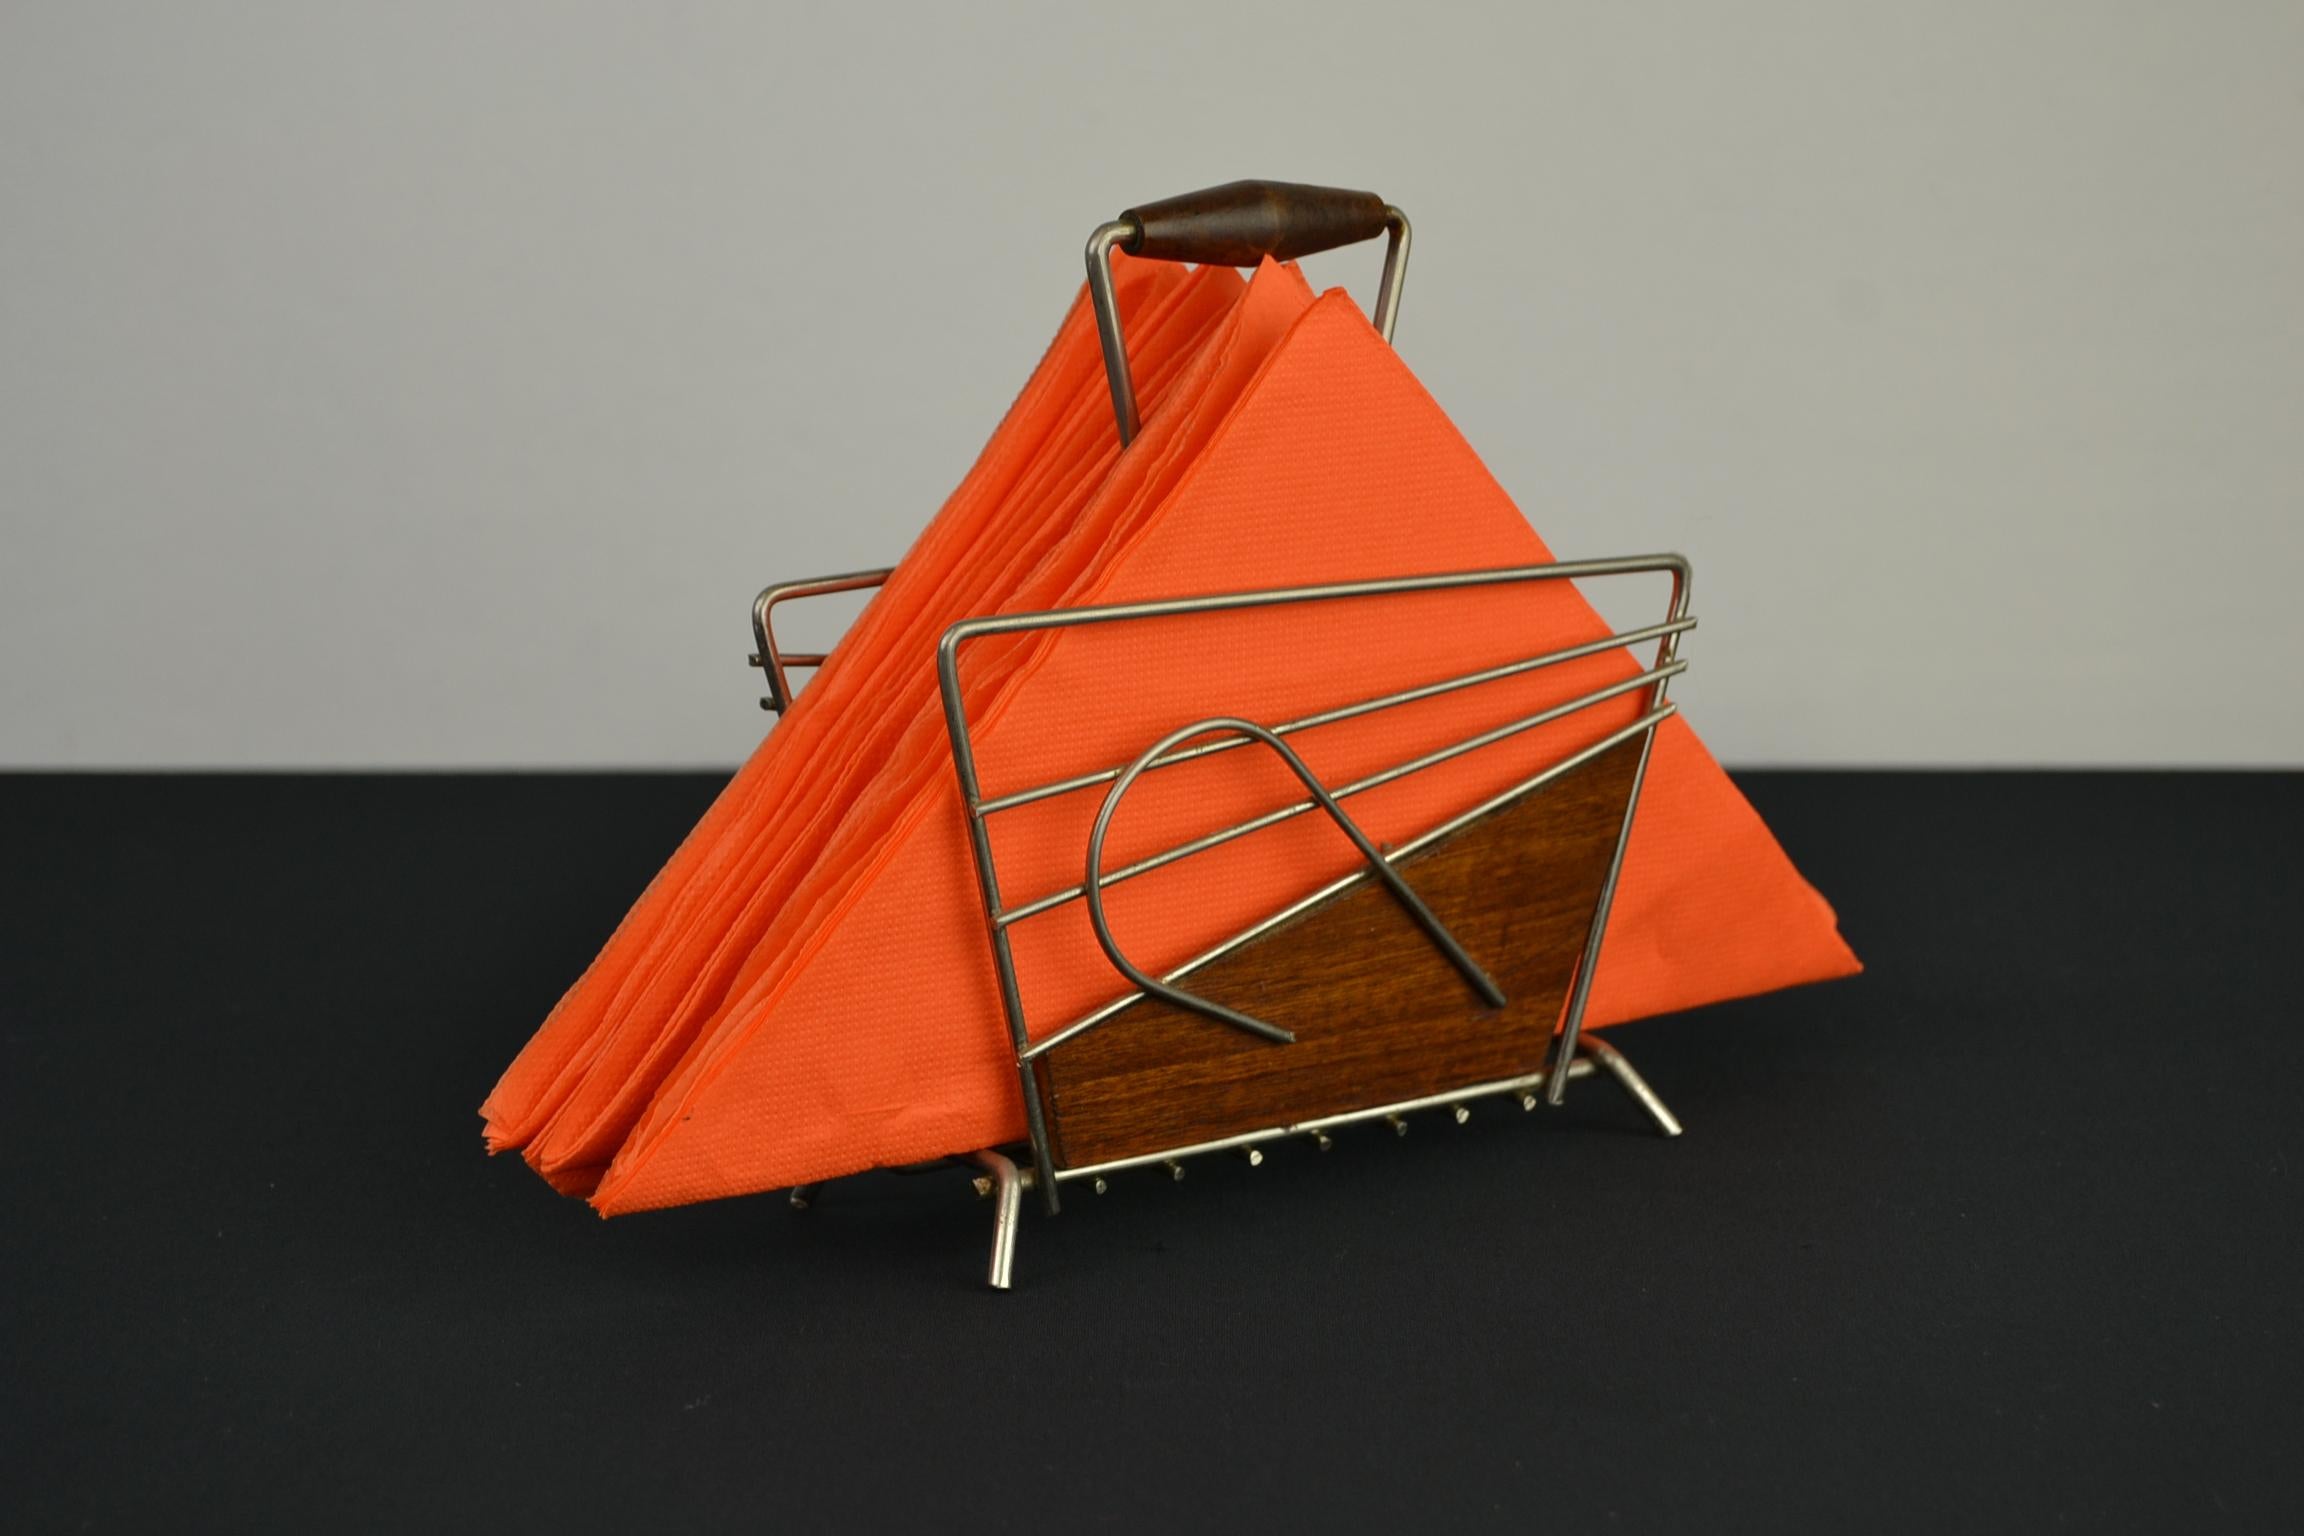 Vintage letter holder in the shape of a miniature magazine rack.
This envelope holder can also be used as a napkin holder.
A miniature rack with handle made of metal and wood.
This cute metal rack can be used to fill or is also beautiful to